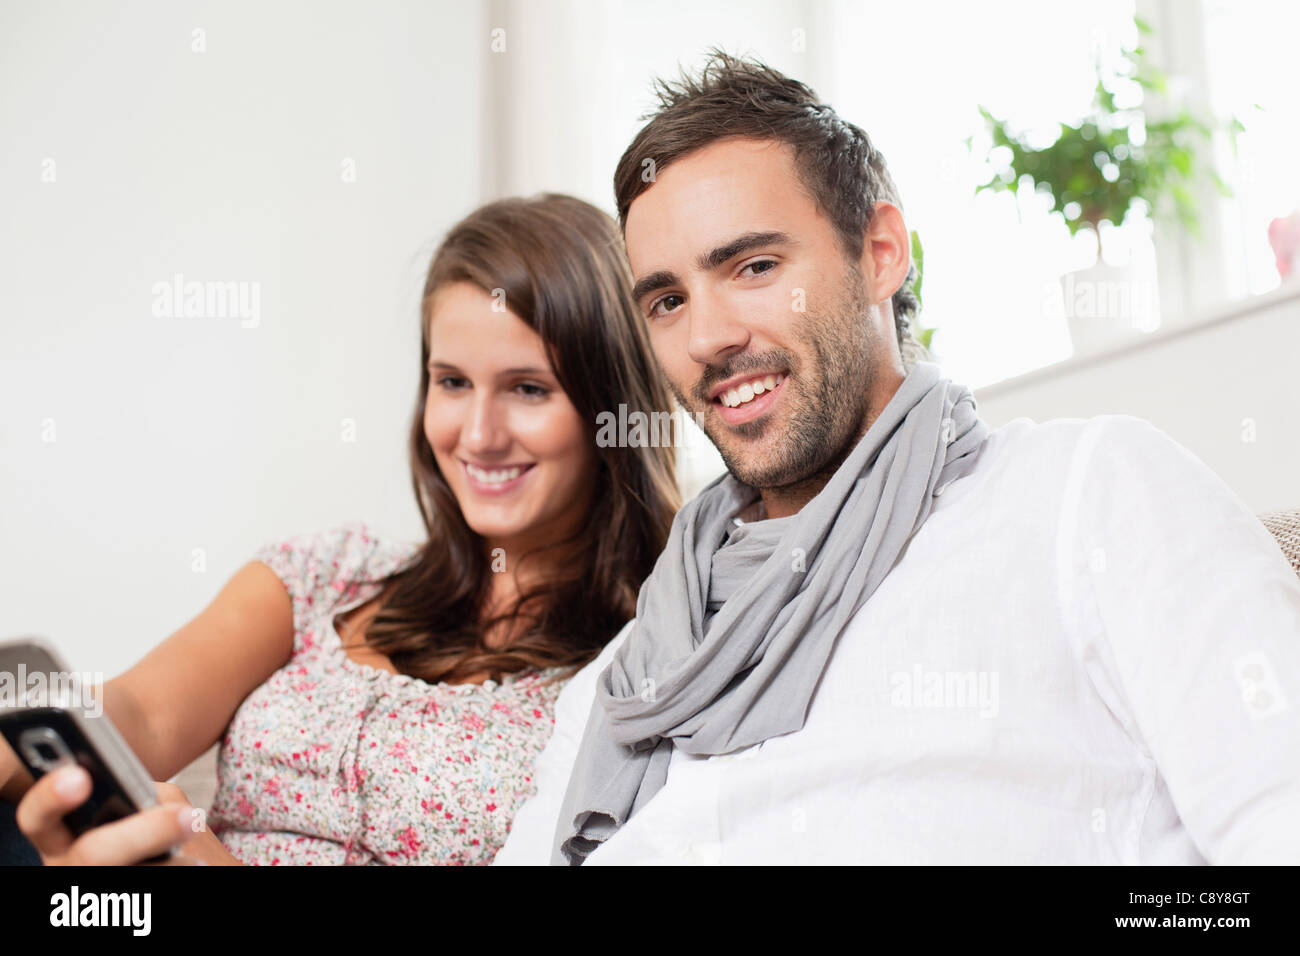 Portrait of young couple text message on mobile phone Banque D'Images